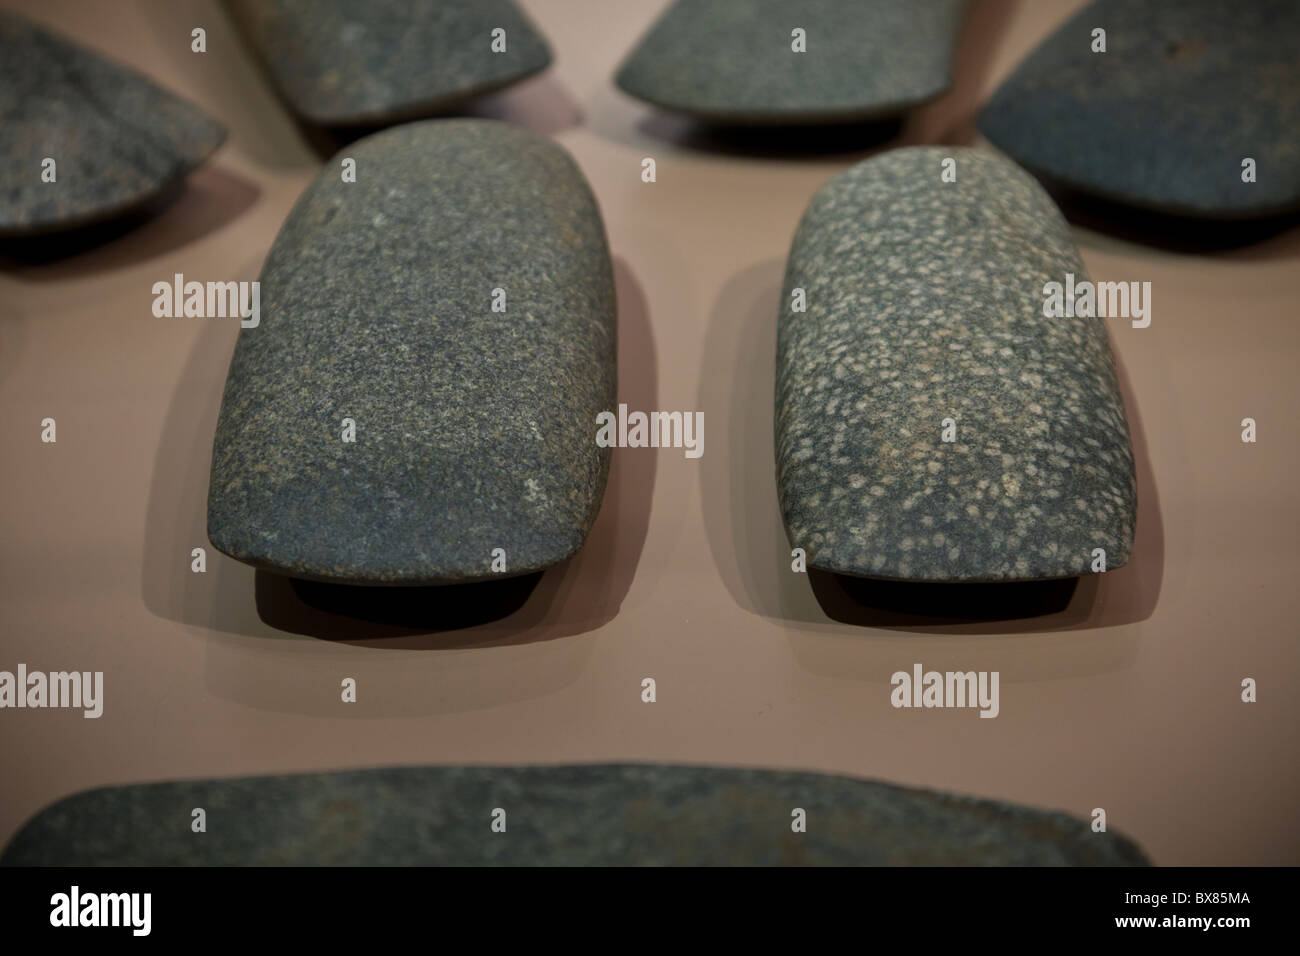 Mississippian Axe Heads or Celts, part of the Grossmann Axe Head Cache at Cahokia Mounds State Historic Site, Illinois, USA. Stock Photo